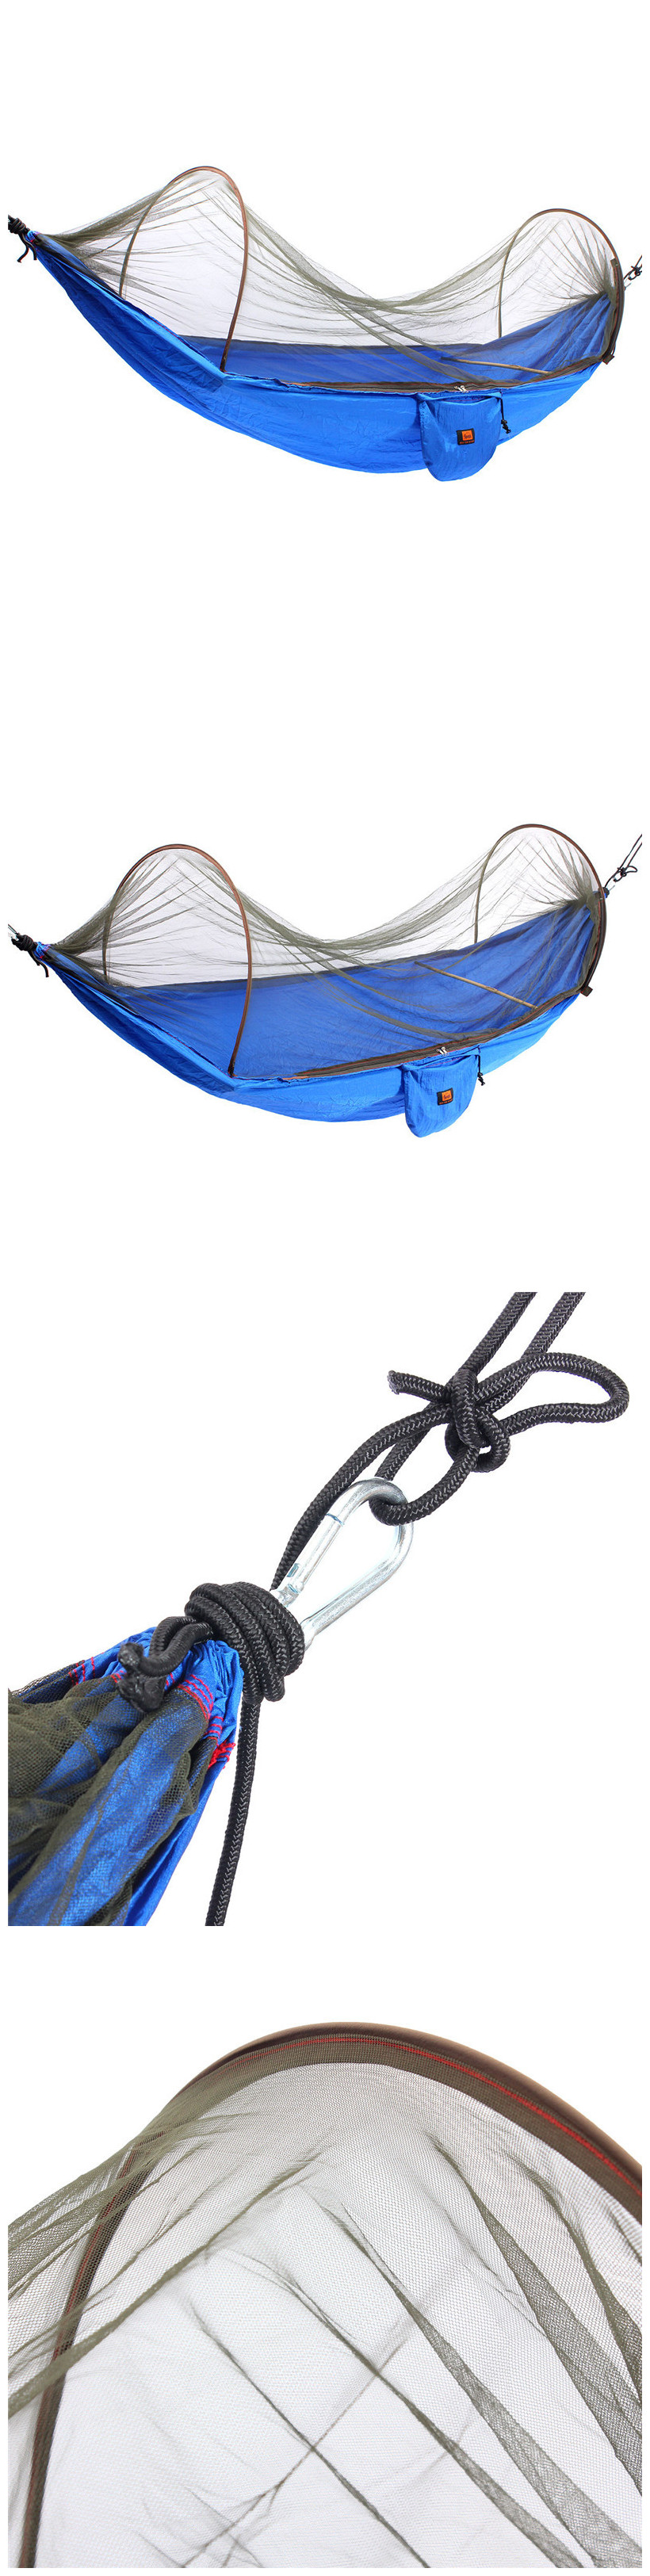 Outdoor-Portable-Camping-Parachute-Hammock-Hanging-Swing-Bed-With-Mosquito-Net-1093863-2